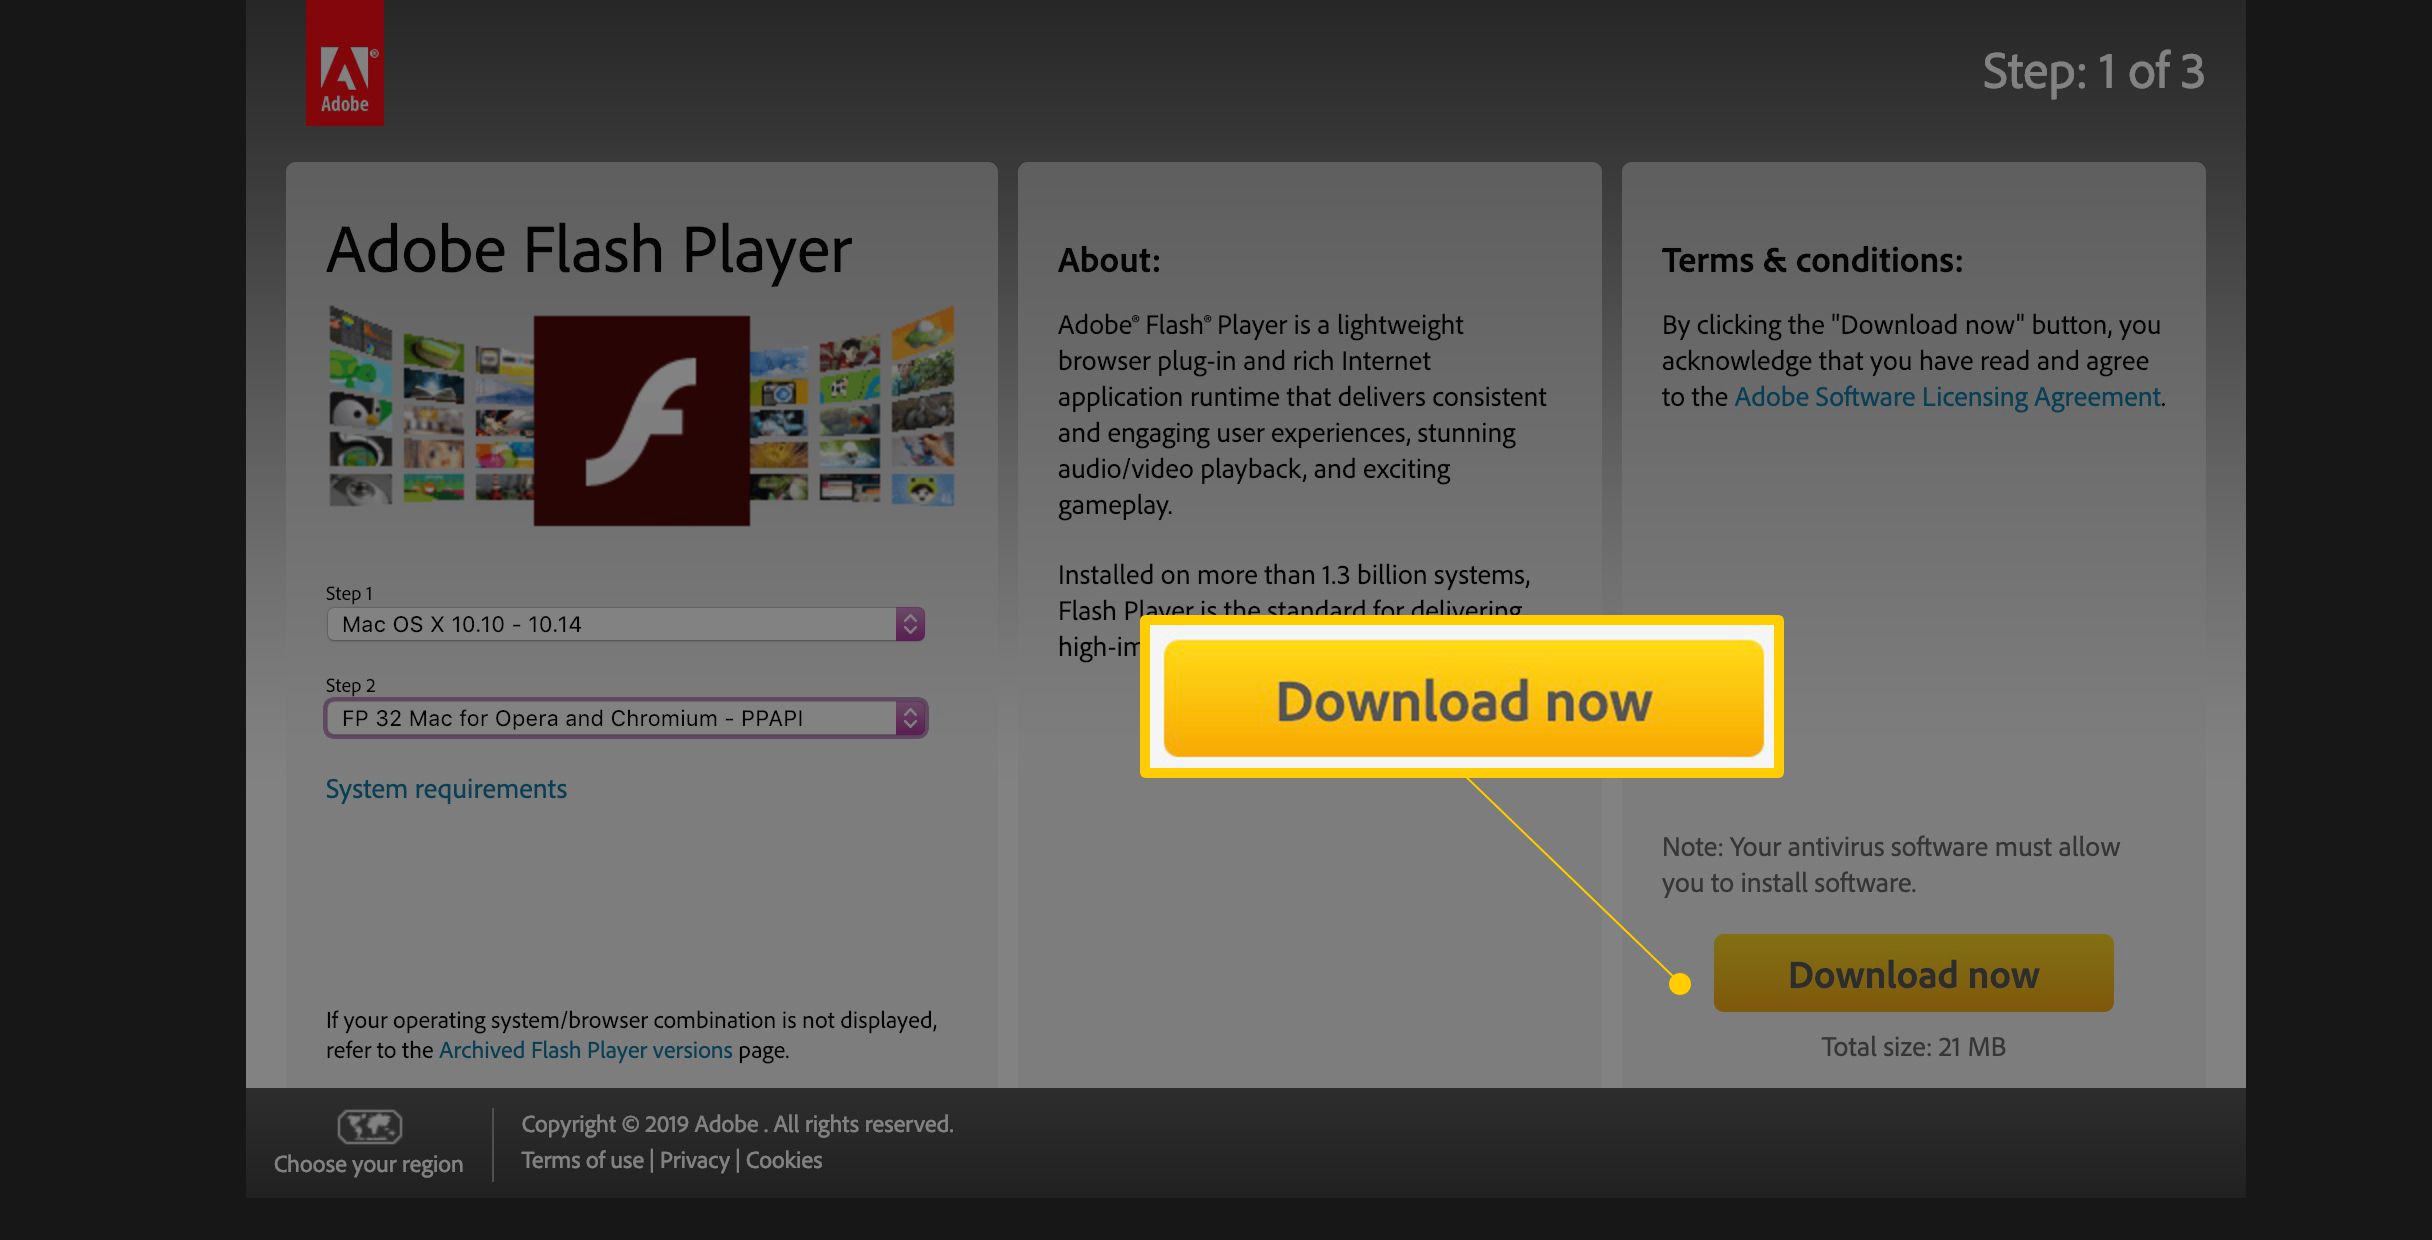 Download now button on Adobe Flash Player page